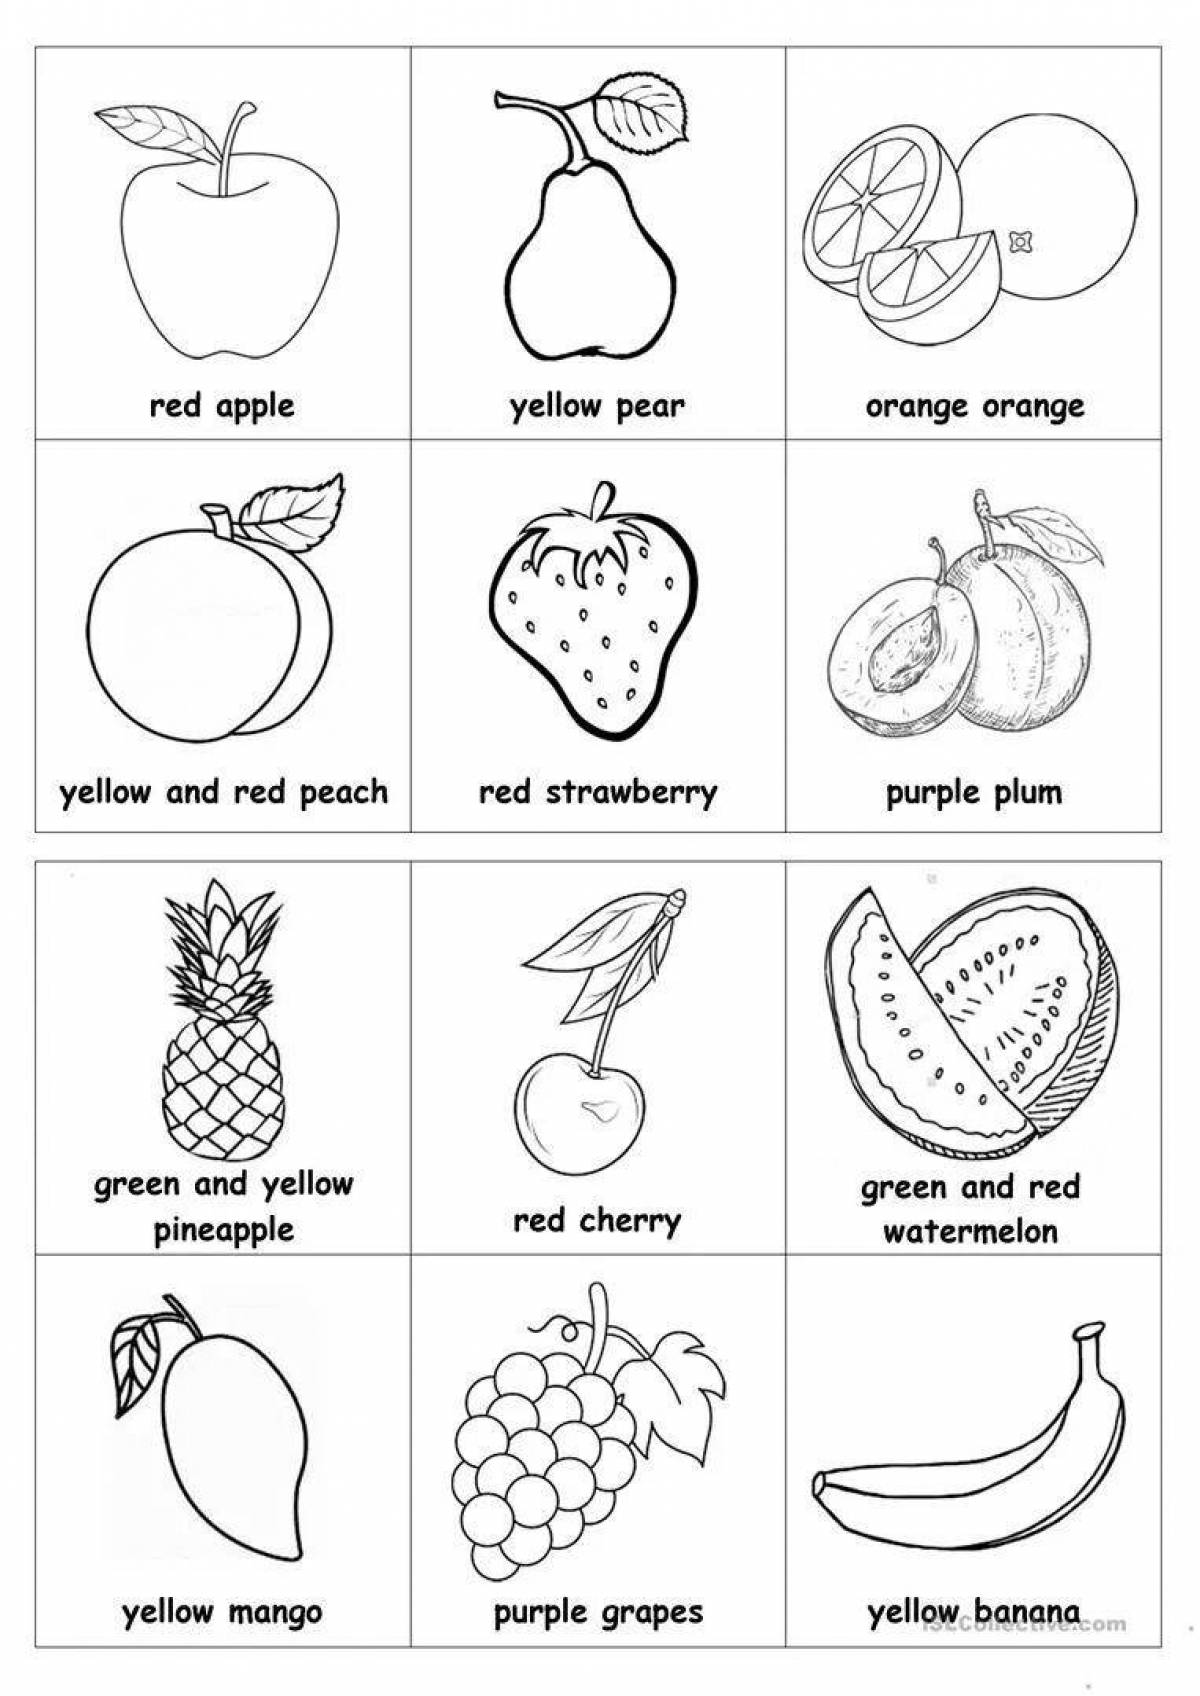 Cute fruits coloring pages for kids